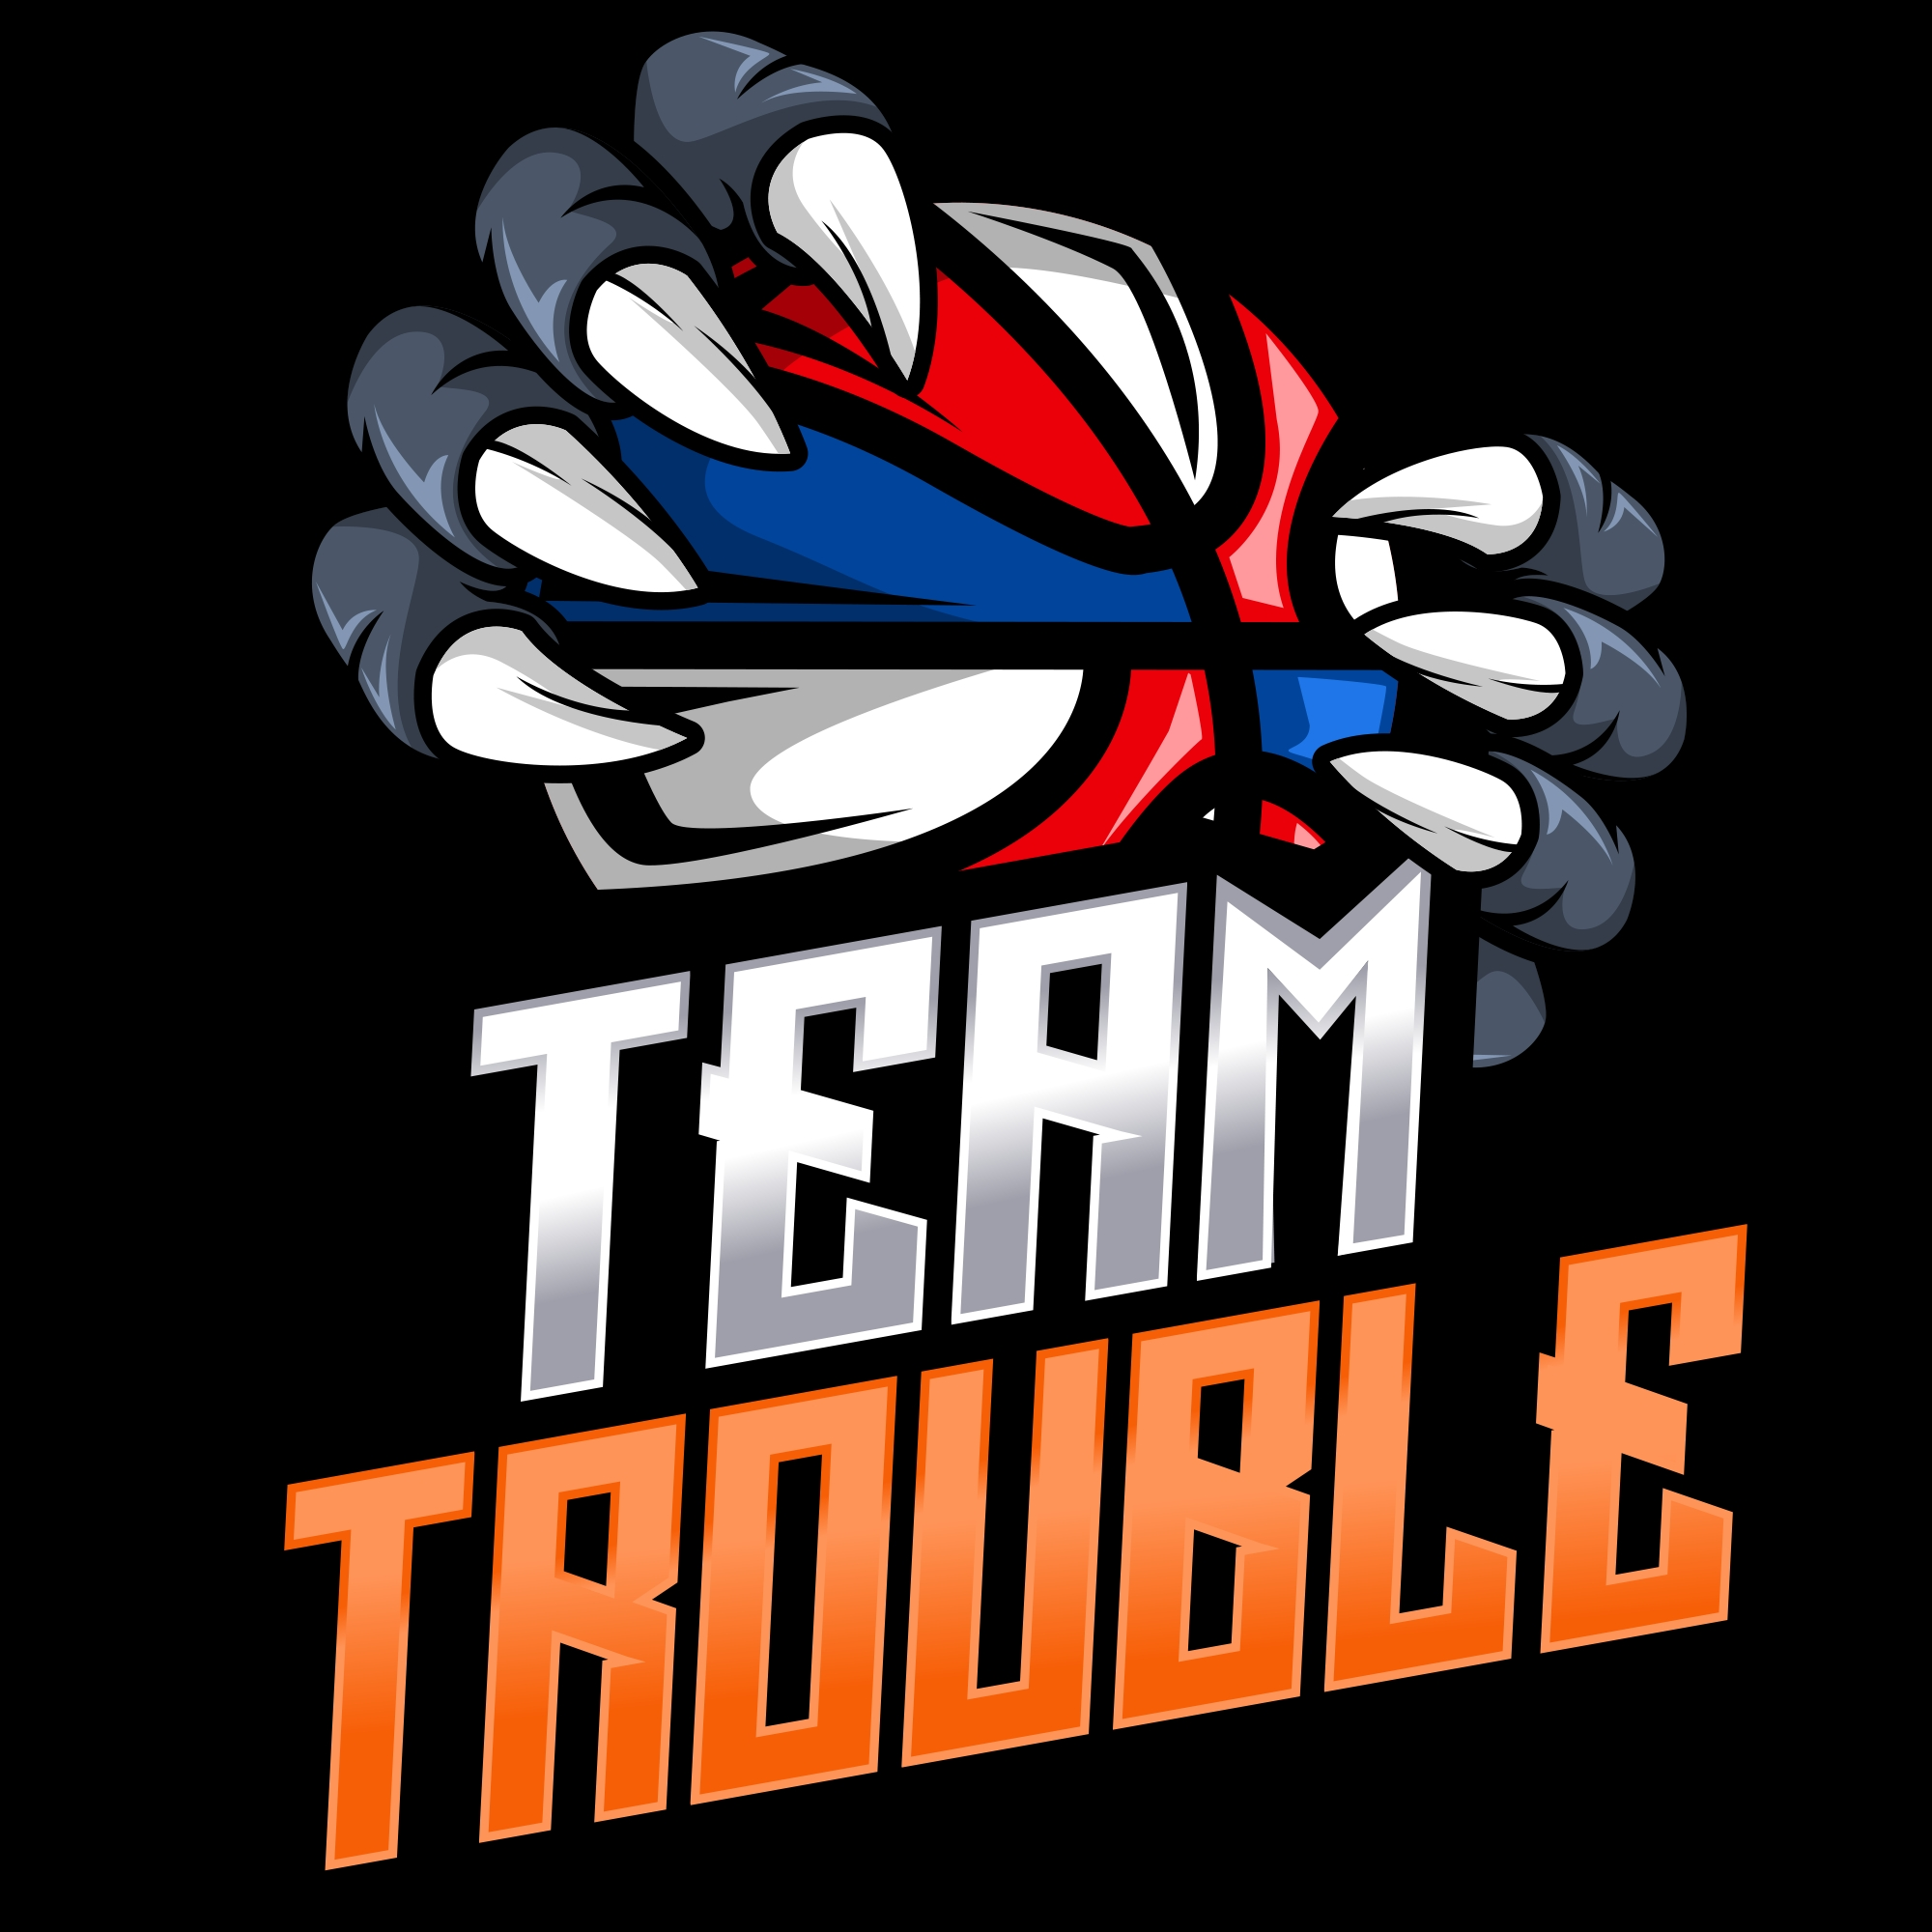 TEAM TROUBLE SPORTS